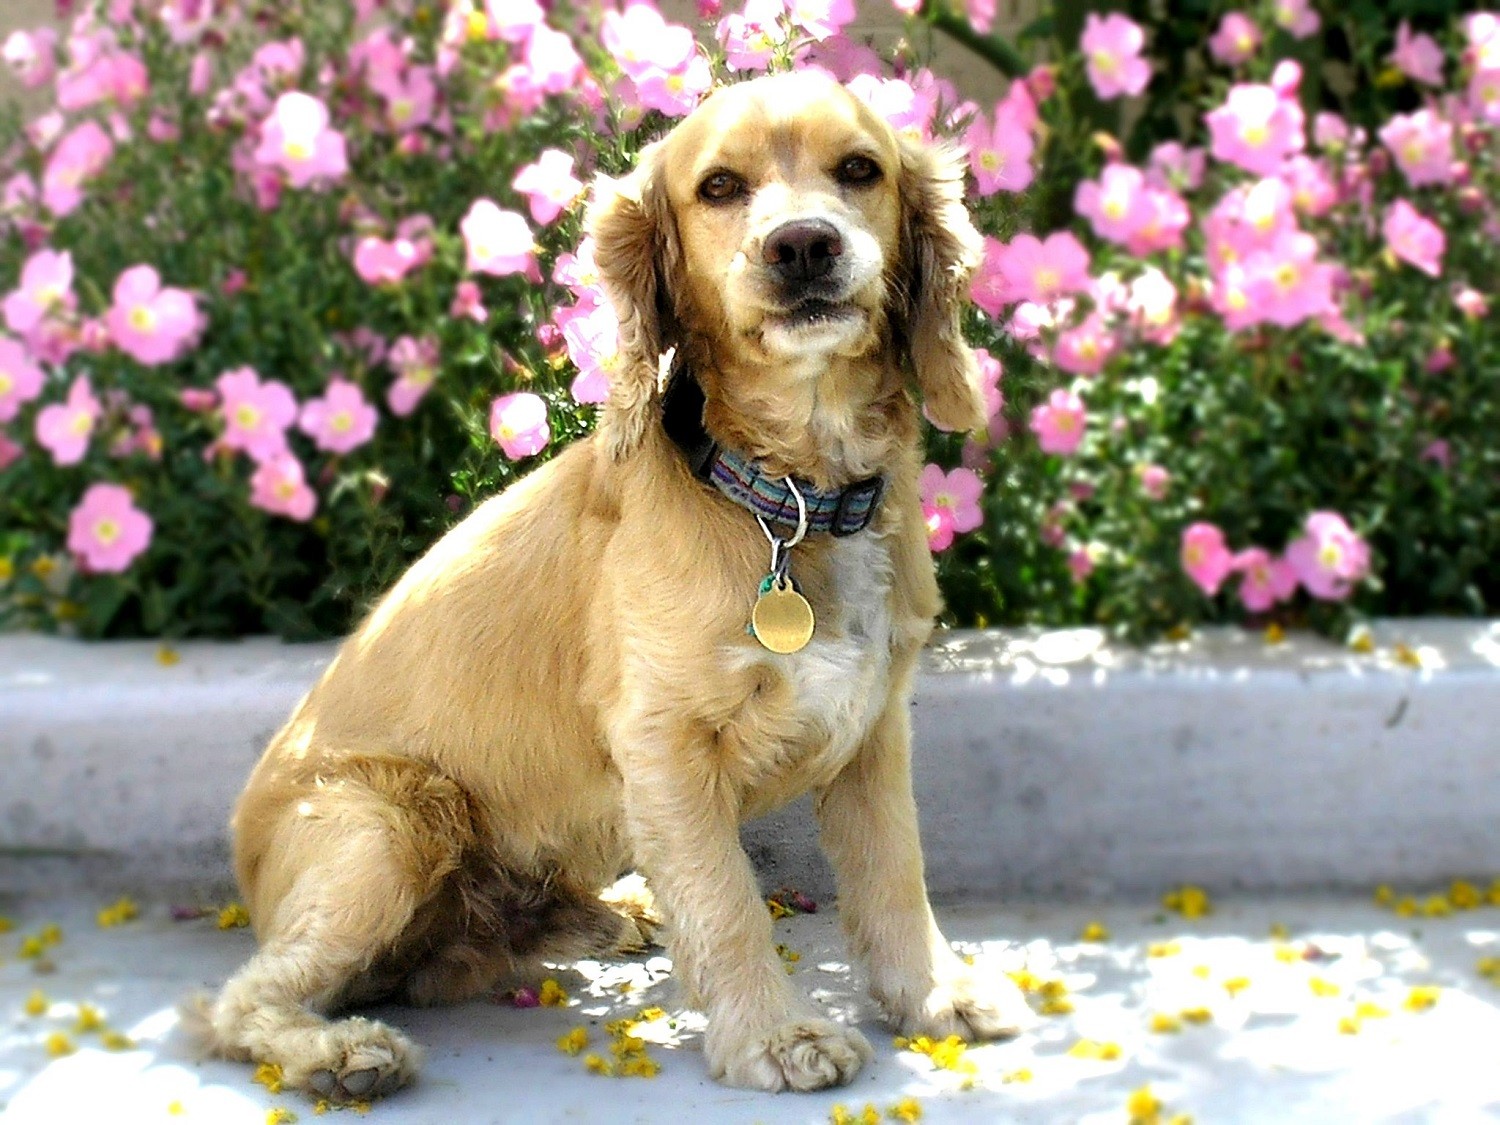 Initially, the English cocker spaniel and the American cocker spaniel were considered one breed (Photo: Wikimedia Commons/ ZooFari/ Public Domain/ CreativeCommons)